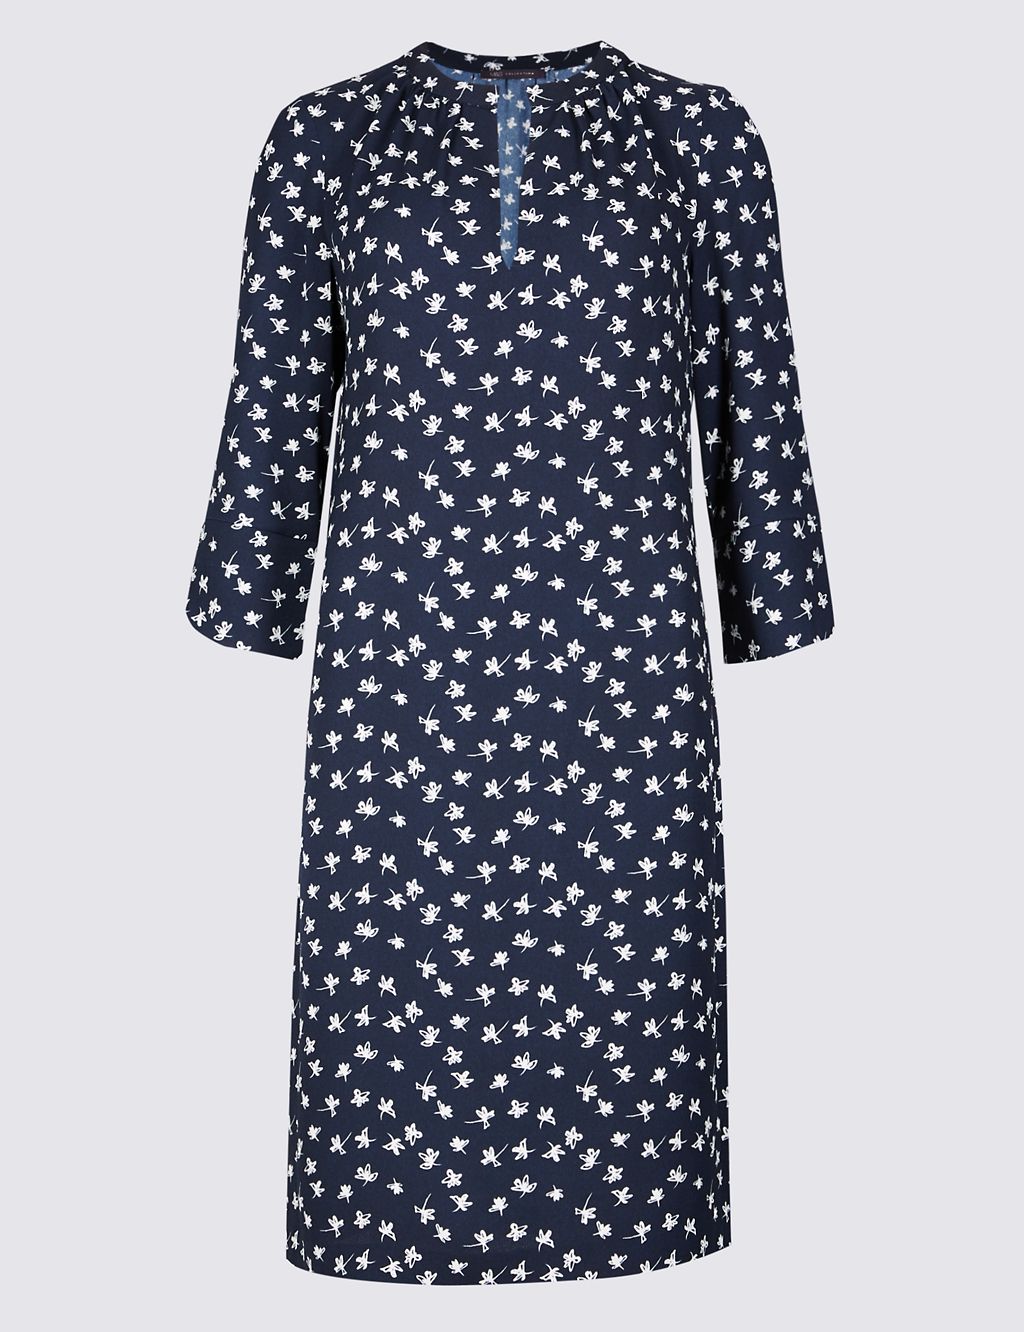 Floral Print 3/4 Sleeve Shift Dress 1 of 5